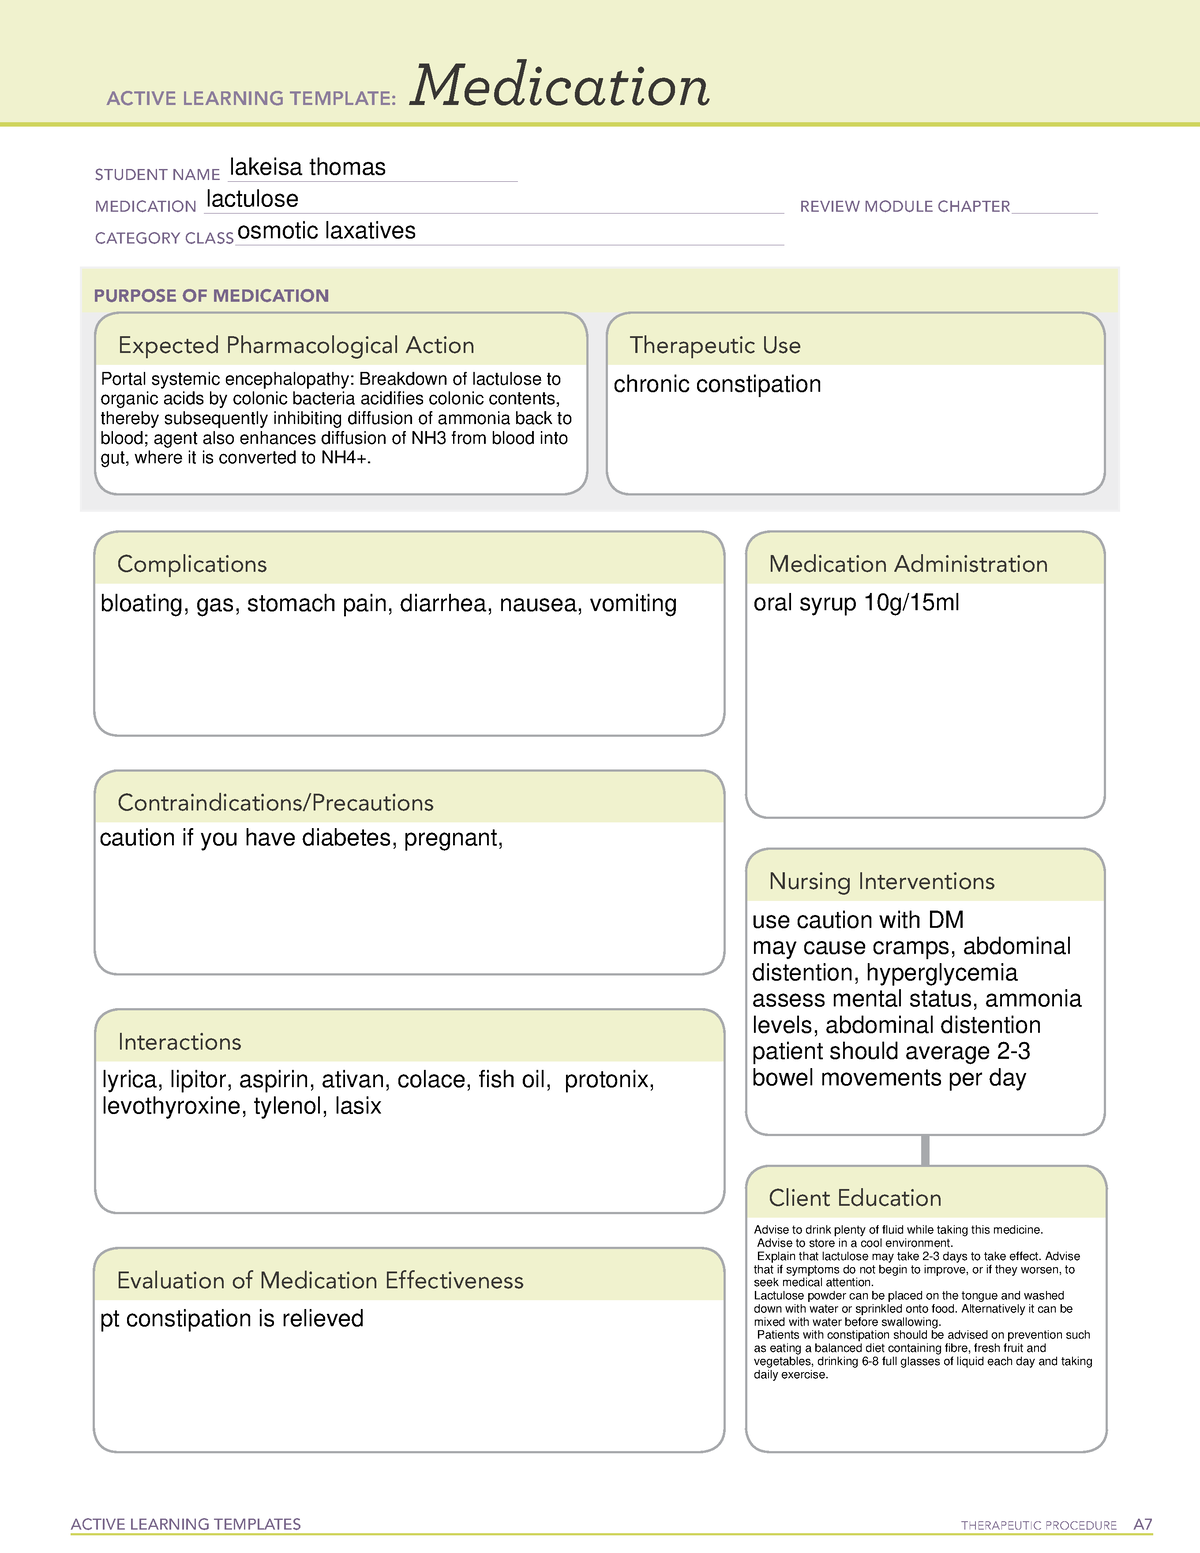 osmotic-laxatives-drug-card-active-learning-templates-therapeutic